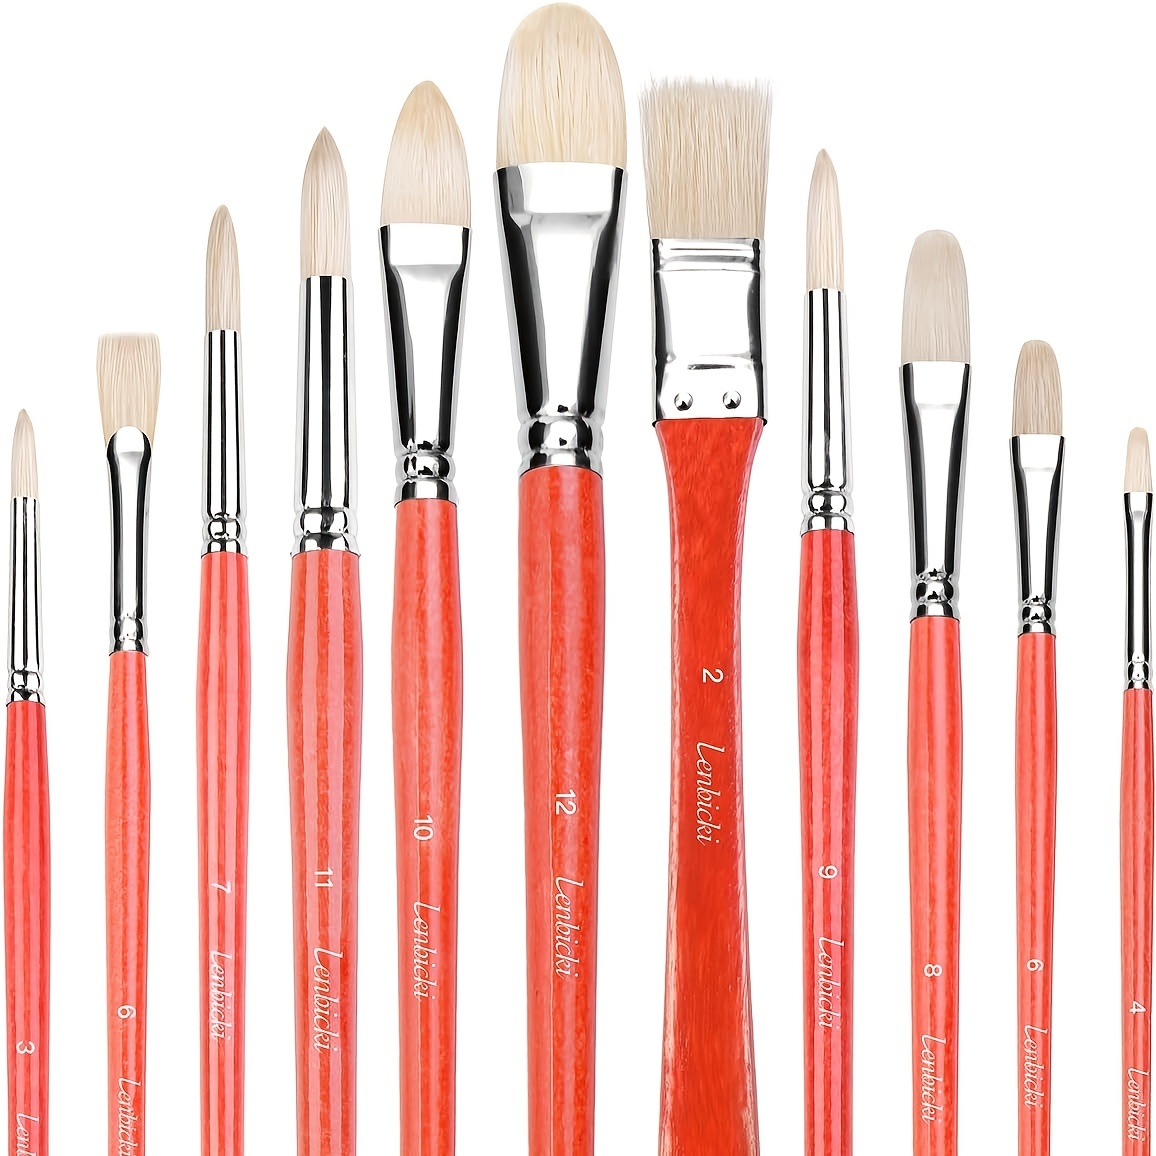 Red Pure Weasel Sable Hair Artist Brushes Filbert Brush Set For Acrylic Oil  Gouche and Watercolor Painting Wooden Handle 6Pcs